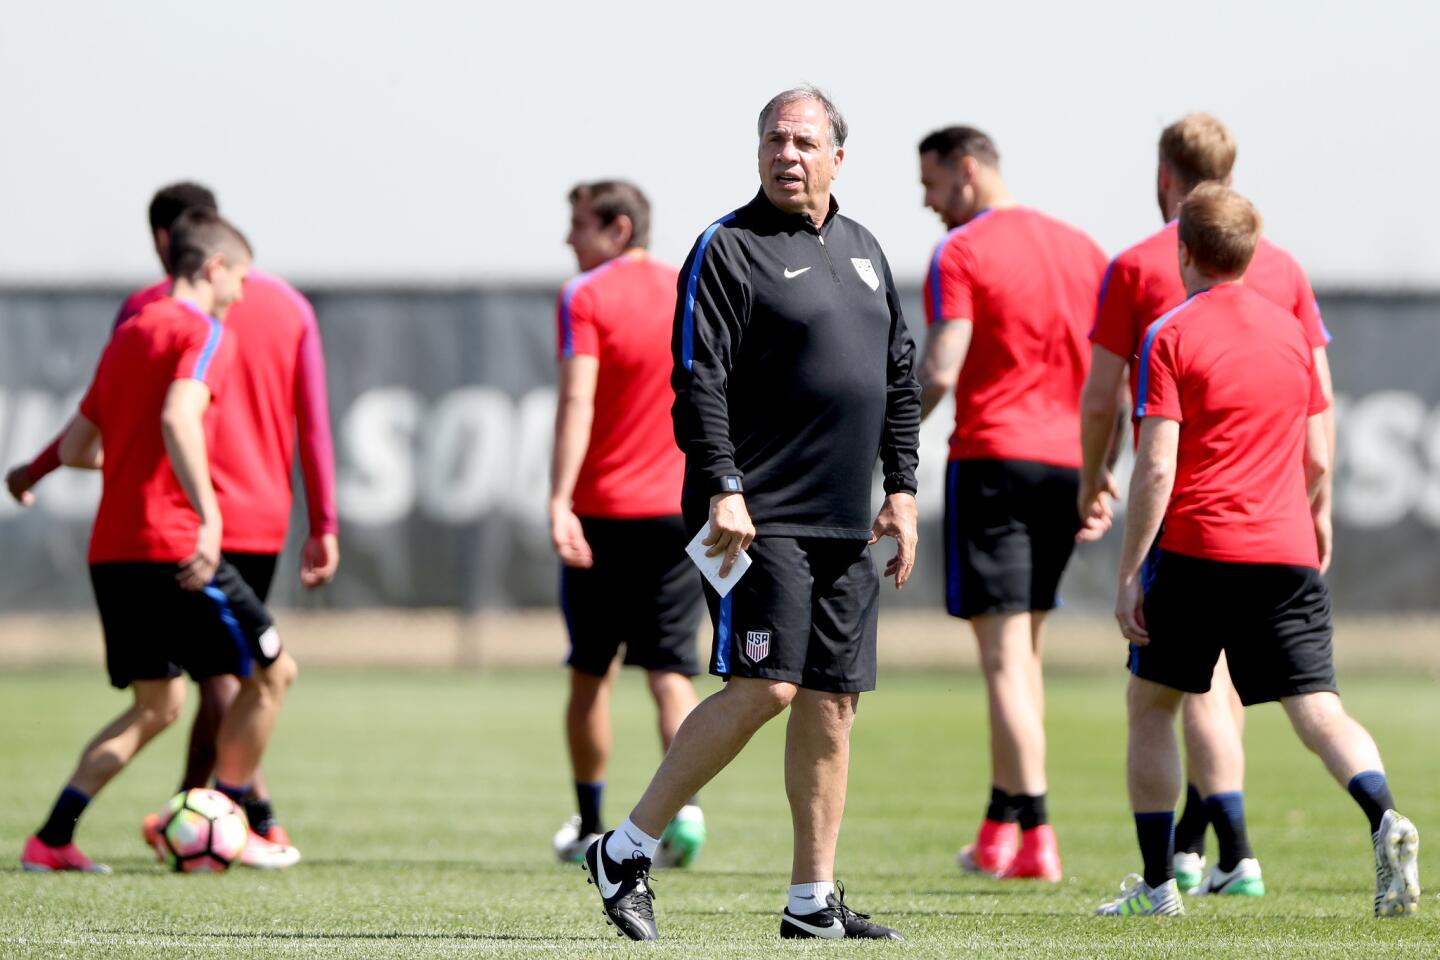 COMMERCE CITY, CO - MAY 31: Head coach Bruce Arena walks on the pitch at the beginning of a training session of the U.S. Men's National Team at Dick's Sporting Goods Park on May 31, 2017 in Commerce City, Colorado. (Photo by Matthew Stockman/Getty Images) ** OUTS - ELSENT, FPG, CM - OUTS * NM, PH, VA if sourced by CT, LA or MoD **